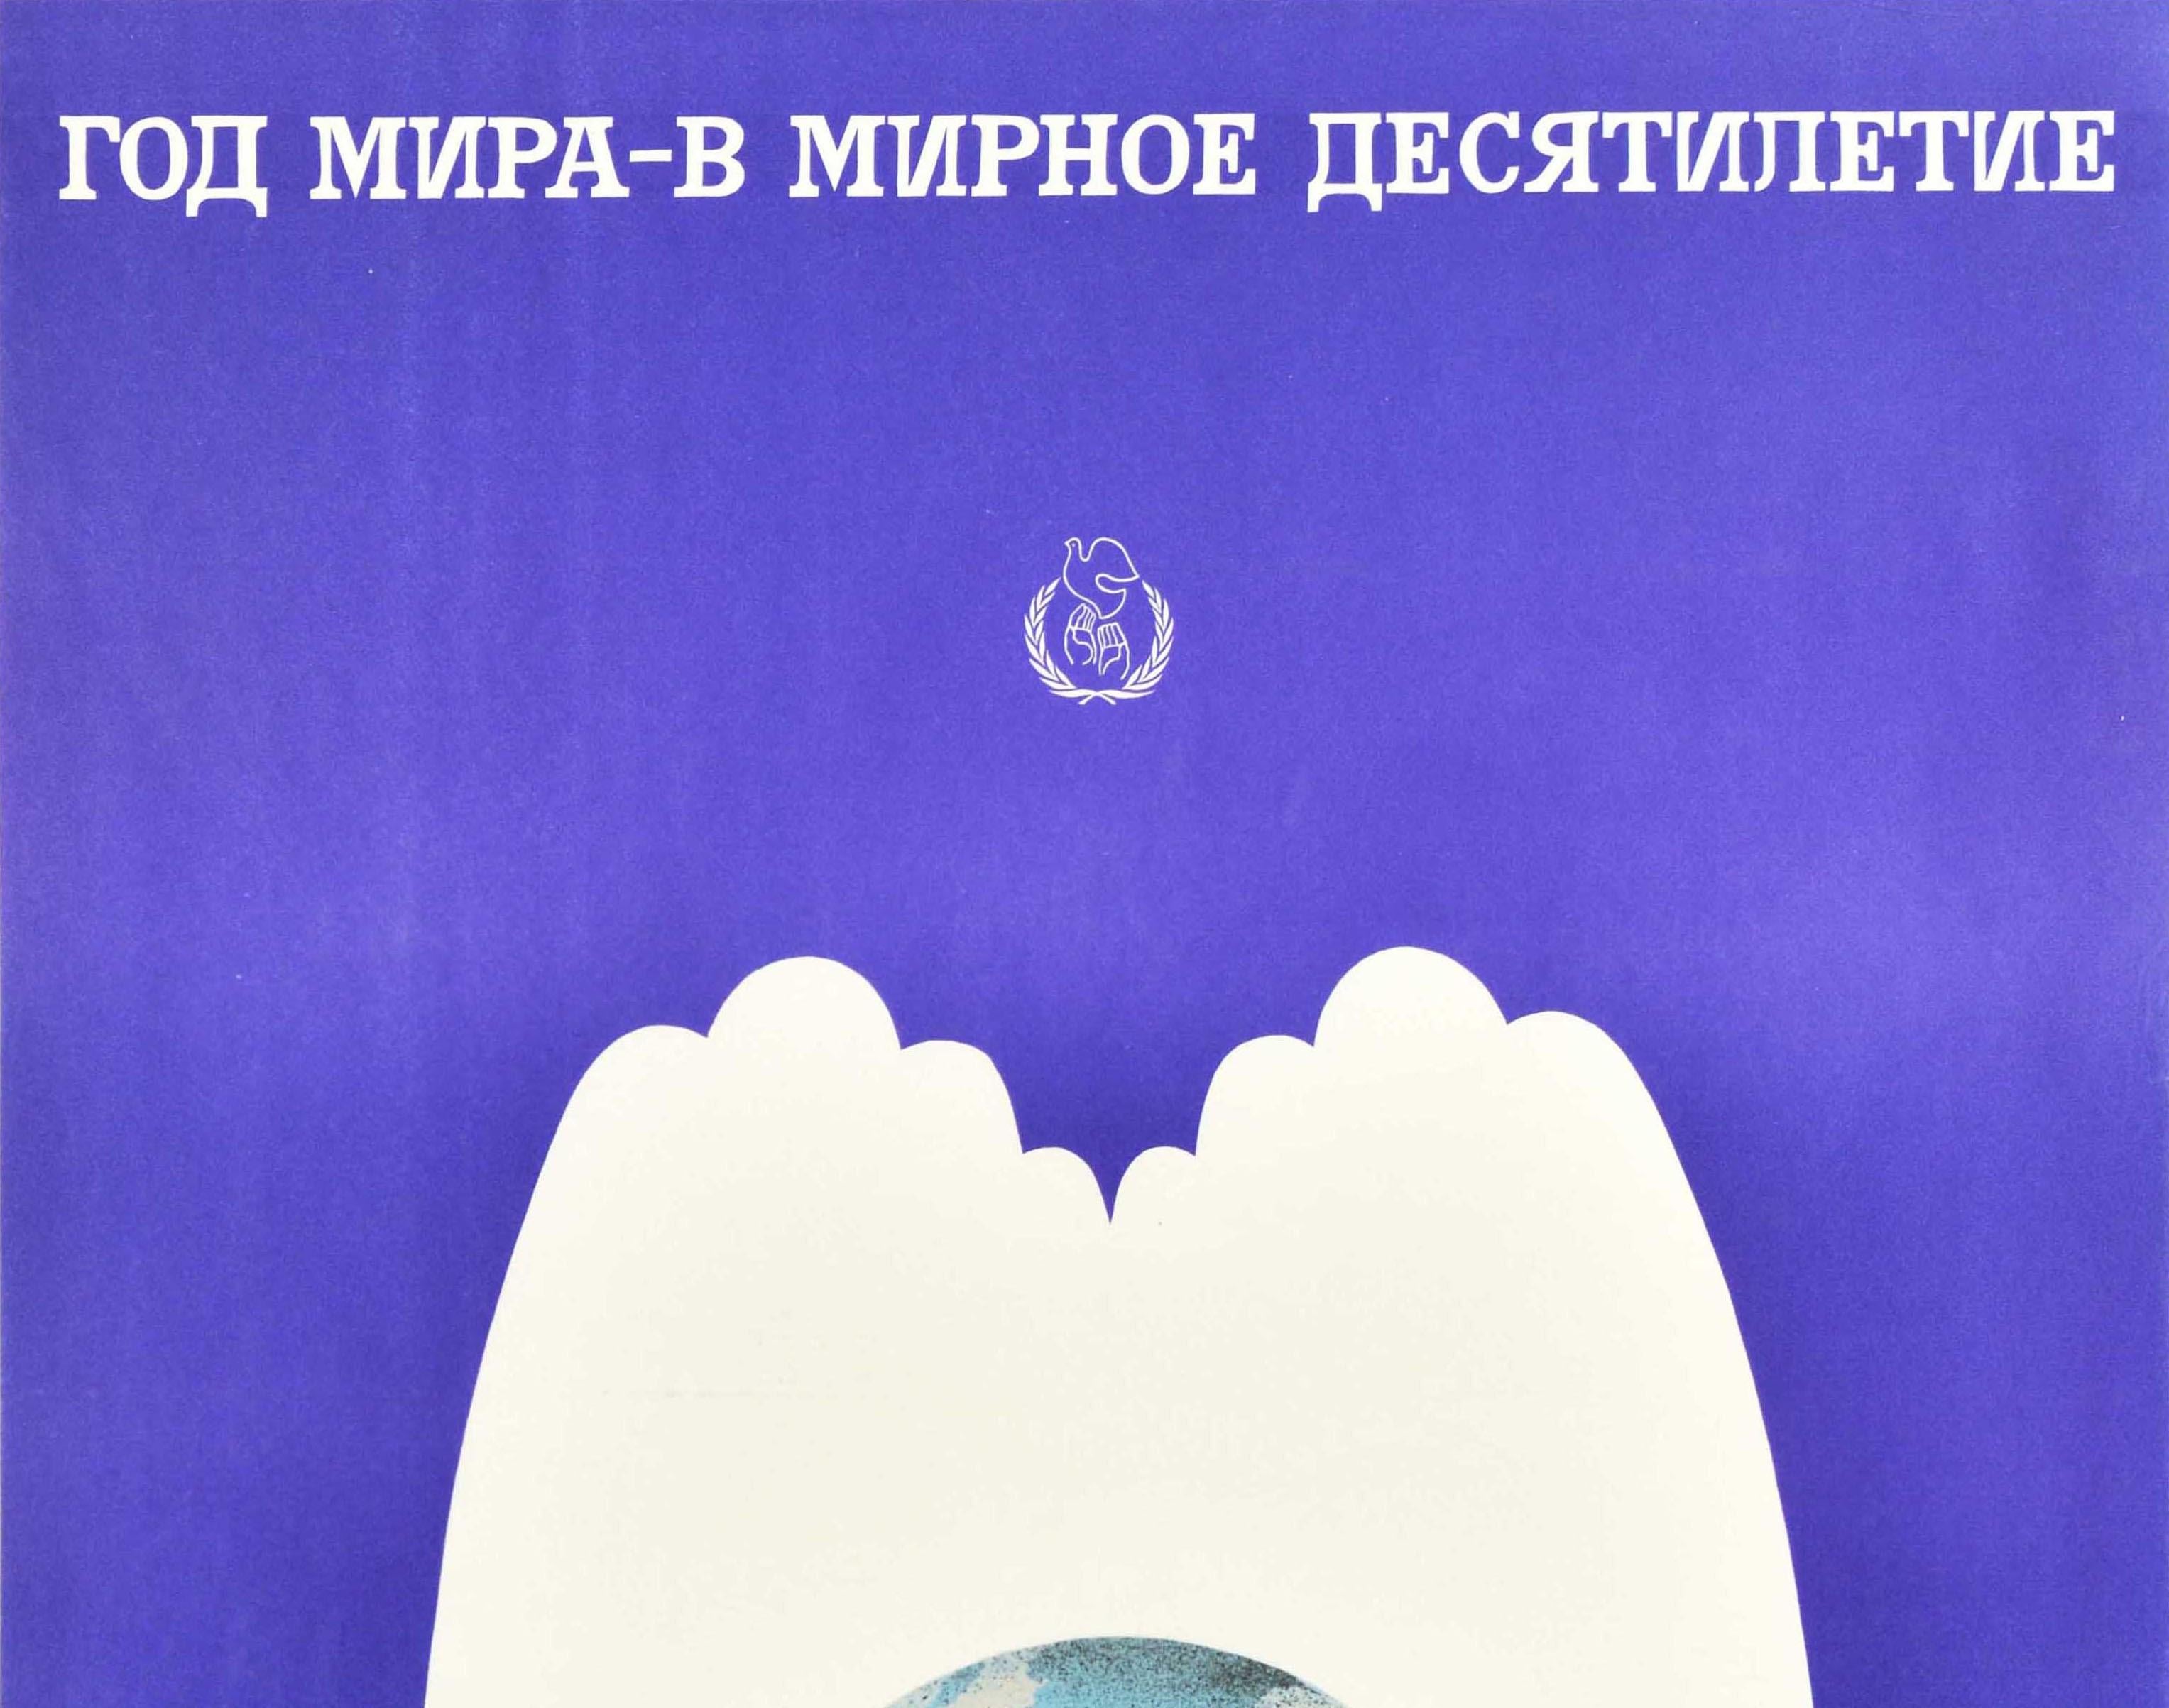 Original vintage Soviet propaganda poster for the International Year of Peace - Into A Peaceful Decade. Great design featuring two hands in the shape of white doves of peace holding a globe set on a blue background, the UN logo of hands releasing a